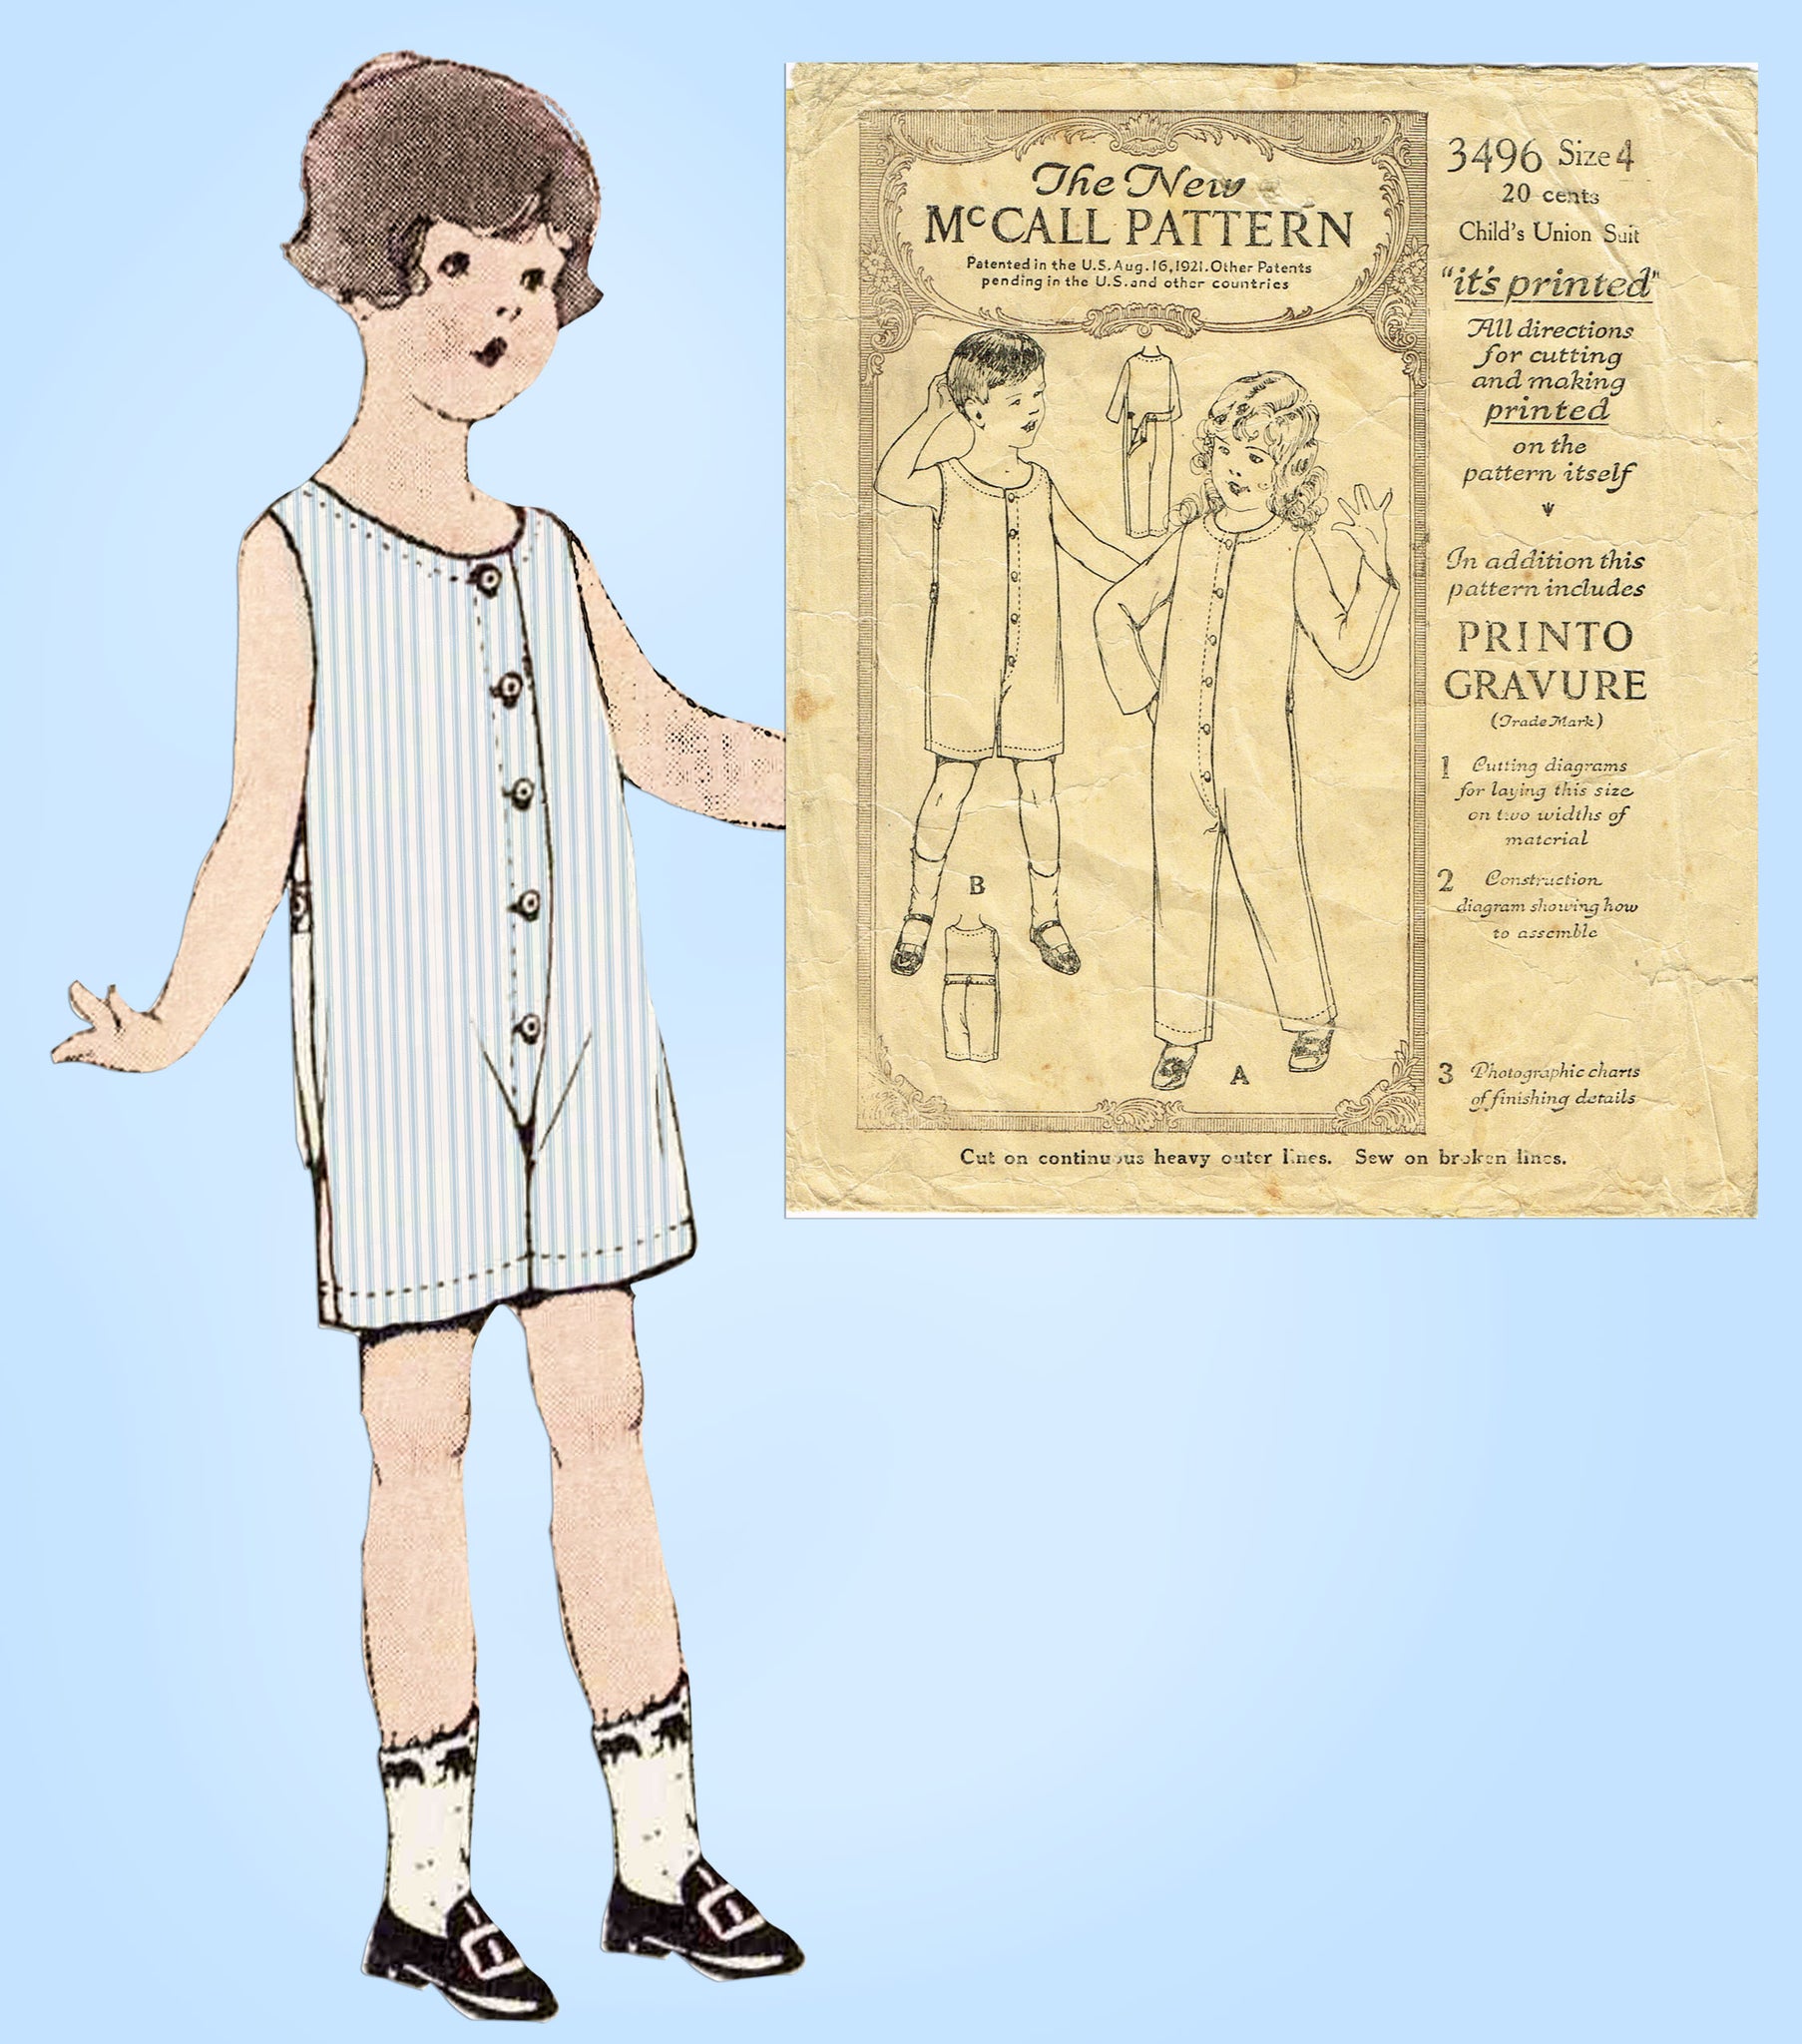 Union suit Pajamas outfit sewing pattern for 18